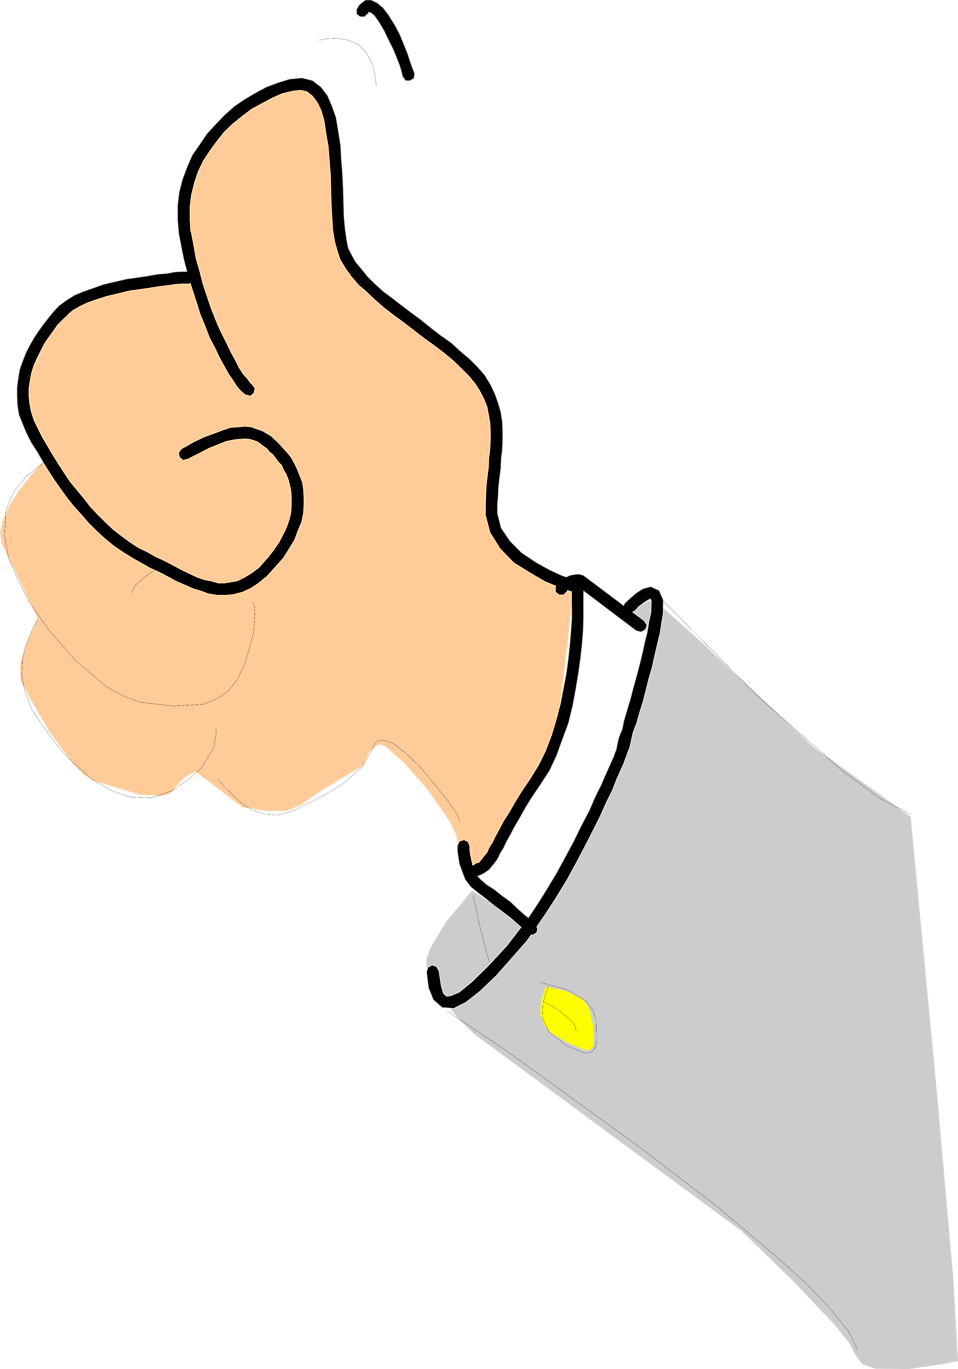 Free Thumbs Up Hand Png, Download Free Thumbs Up Hand Png png images, Free  ClipArts on Clipart Library